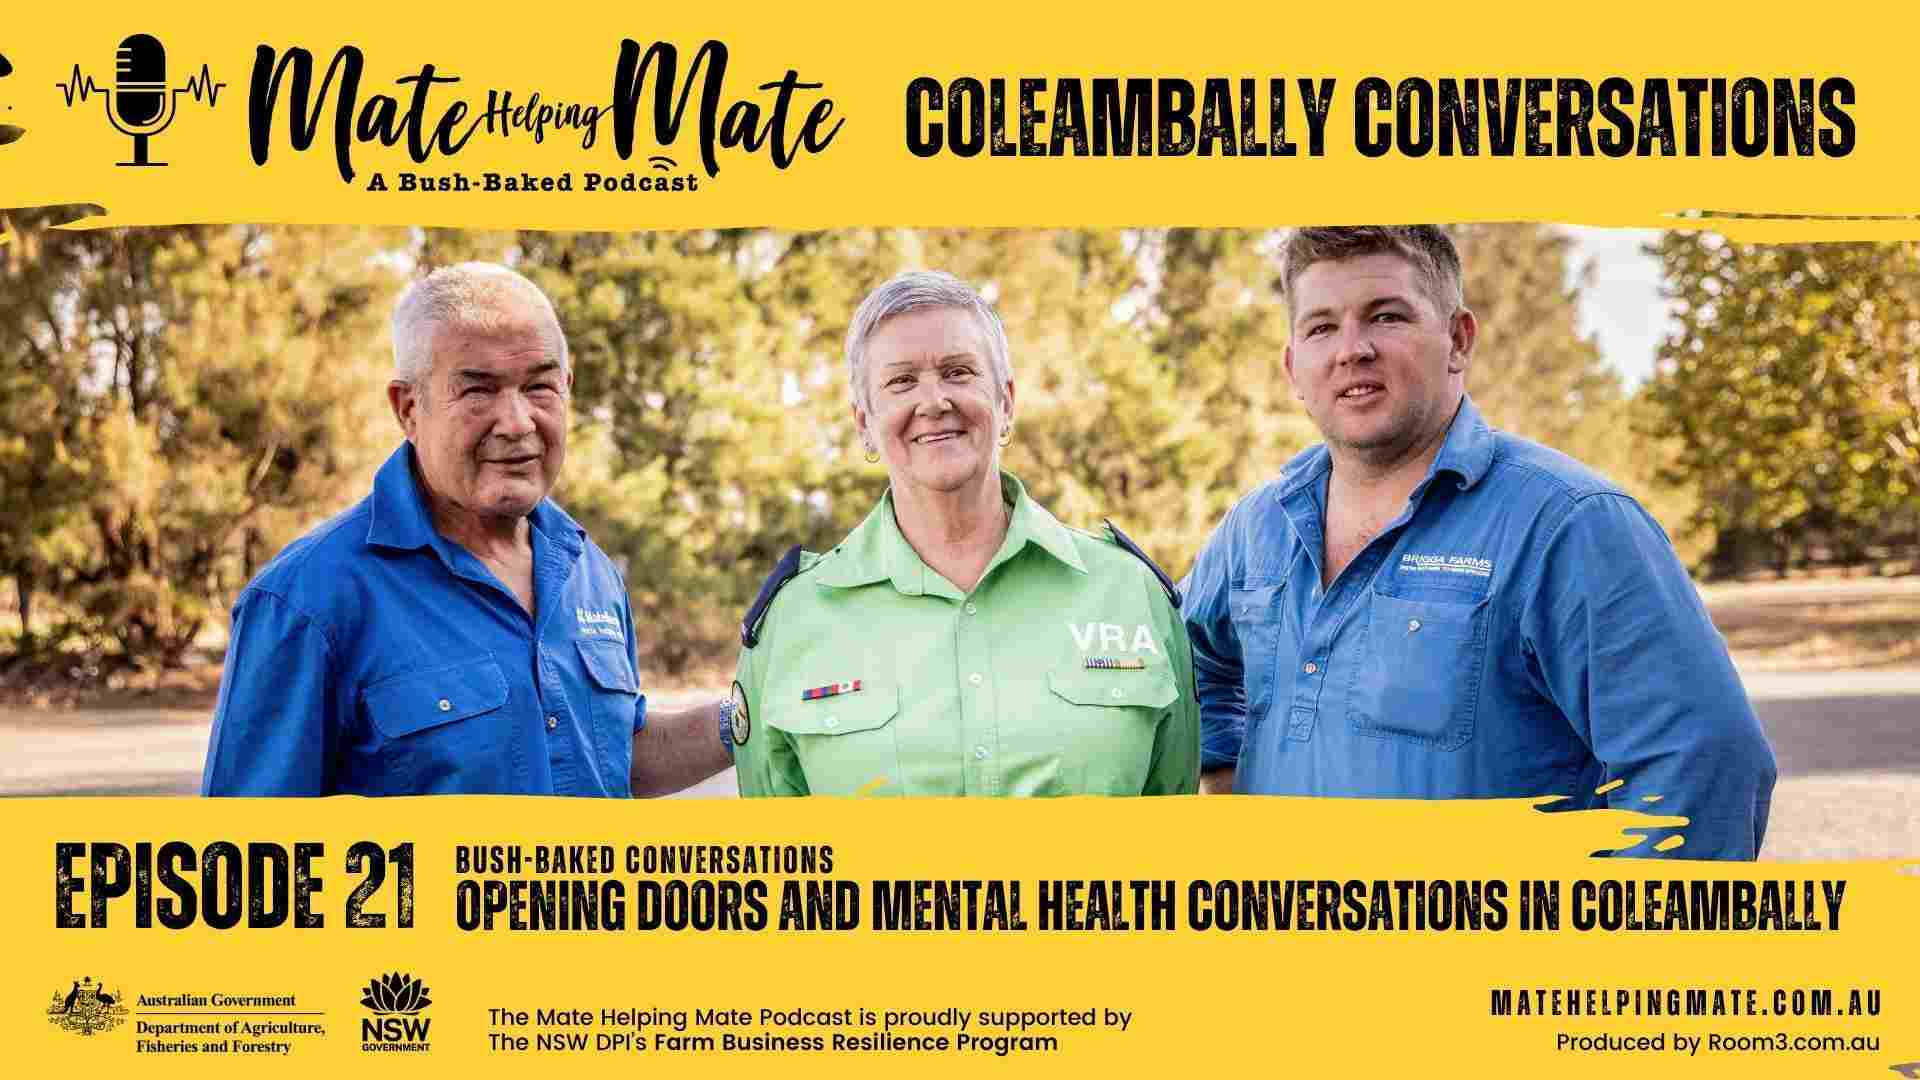 Bush-Baked Conversations - Opening doors and mental health conversations in Colleambally